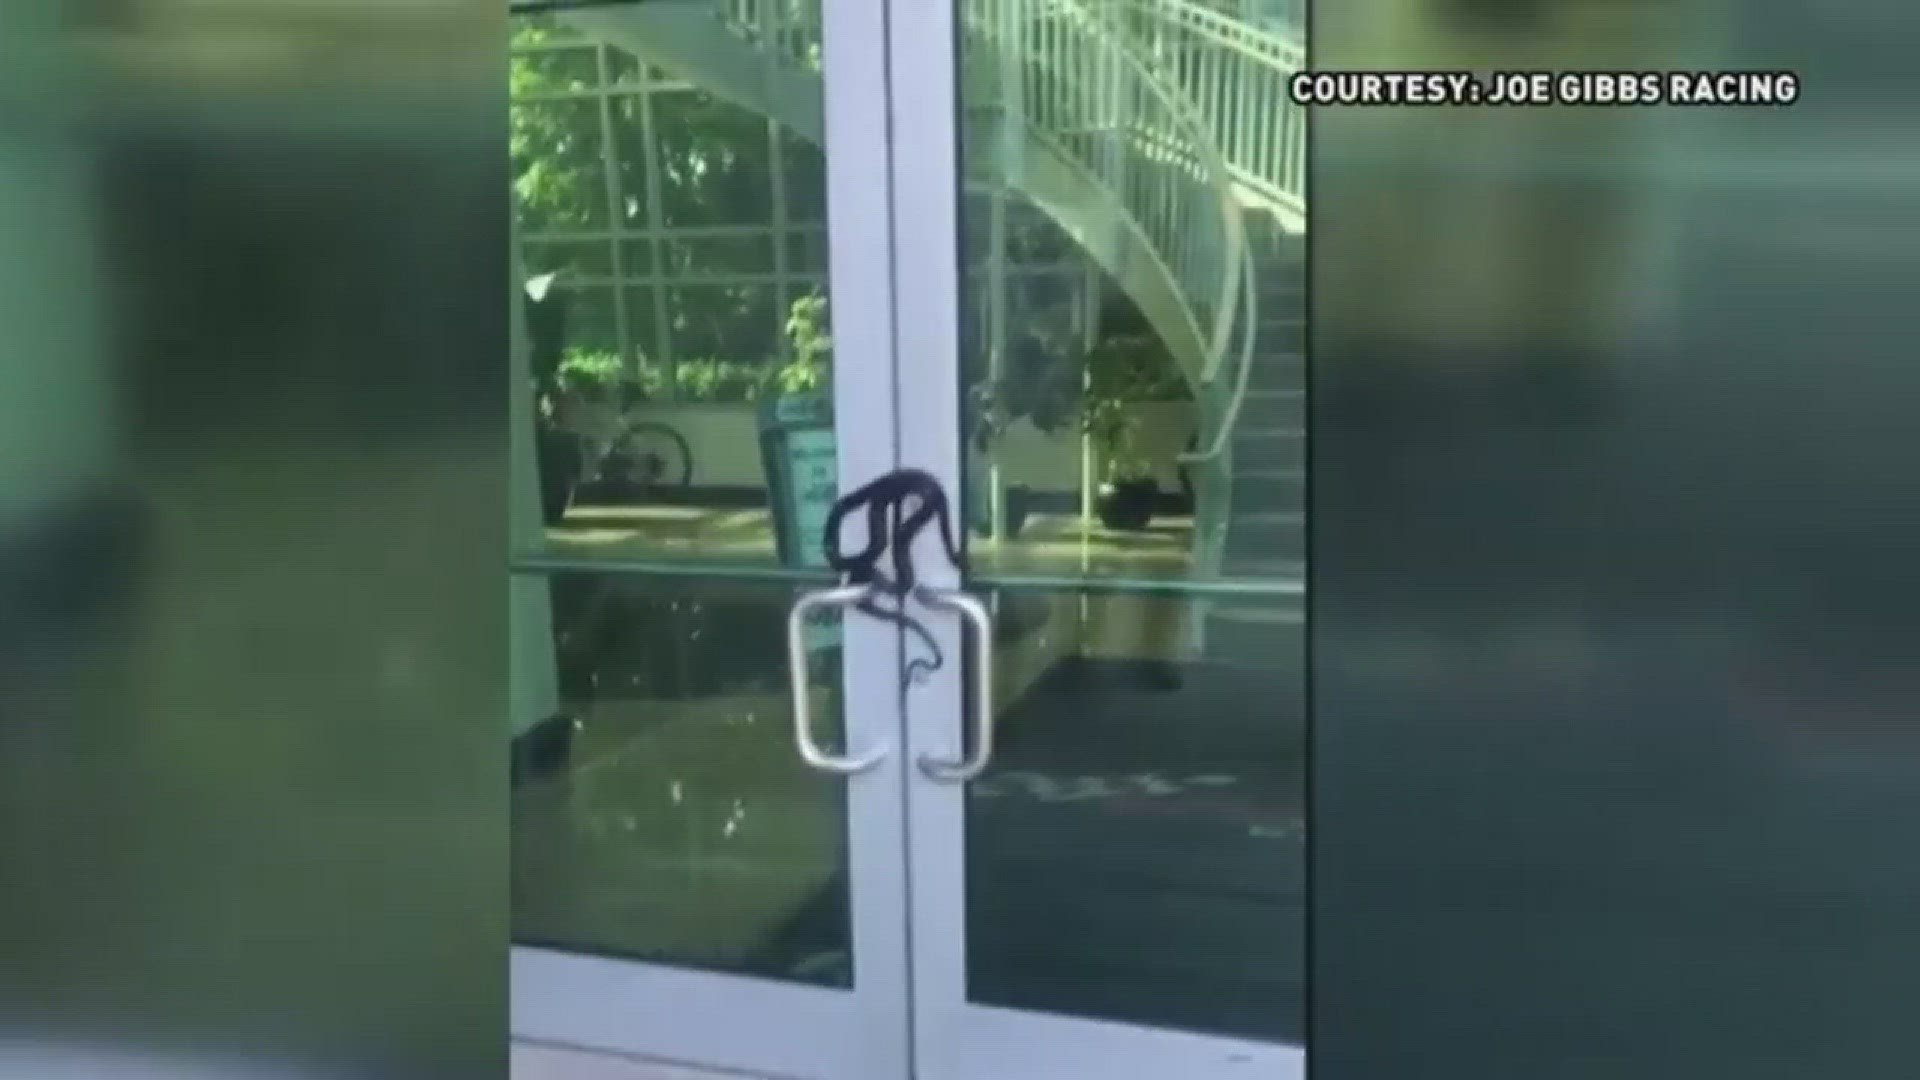 Joe Gibbs Racing headquarters in Huntersville, were greeted by a bold, black snake after returning from lunch. The reptile was wrapped around the door handles, a spokesperson confirmed.